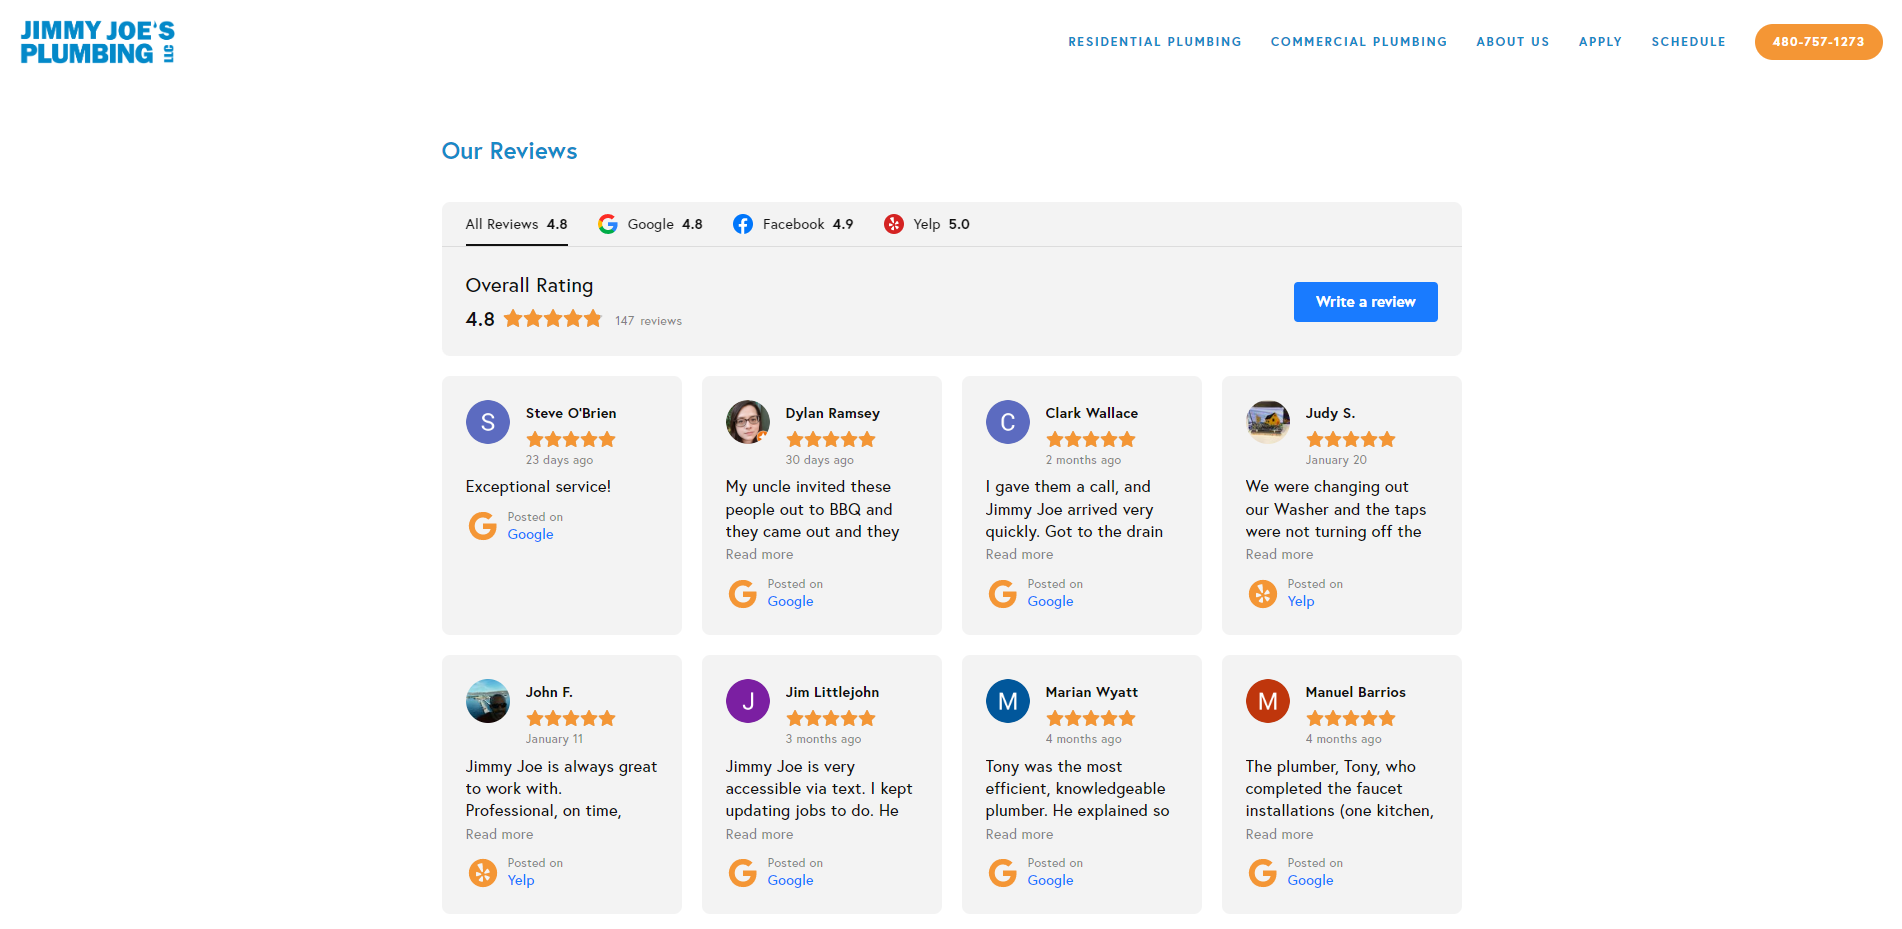 I like their reviews section very much — well-designed, categorized, and real-time.